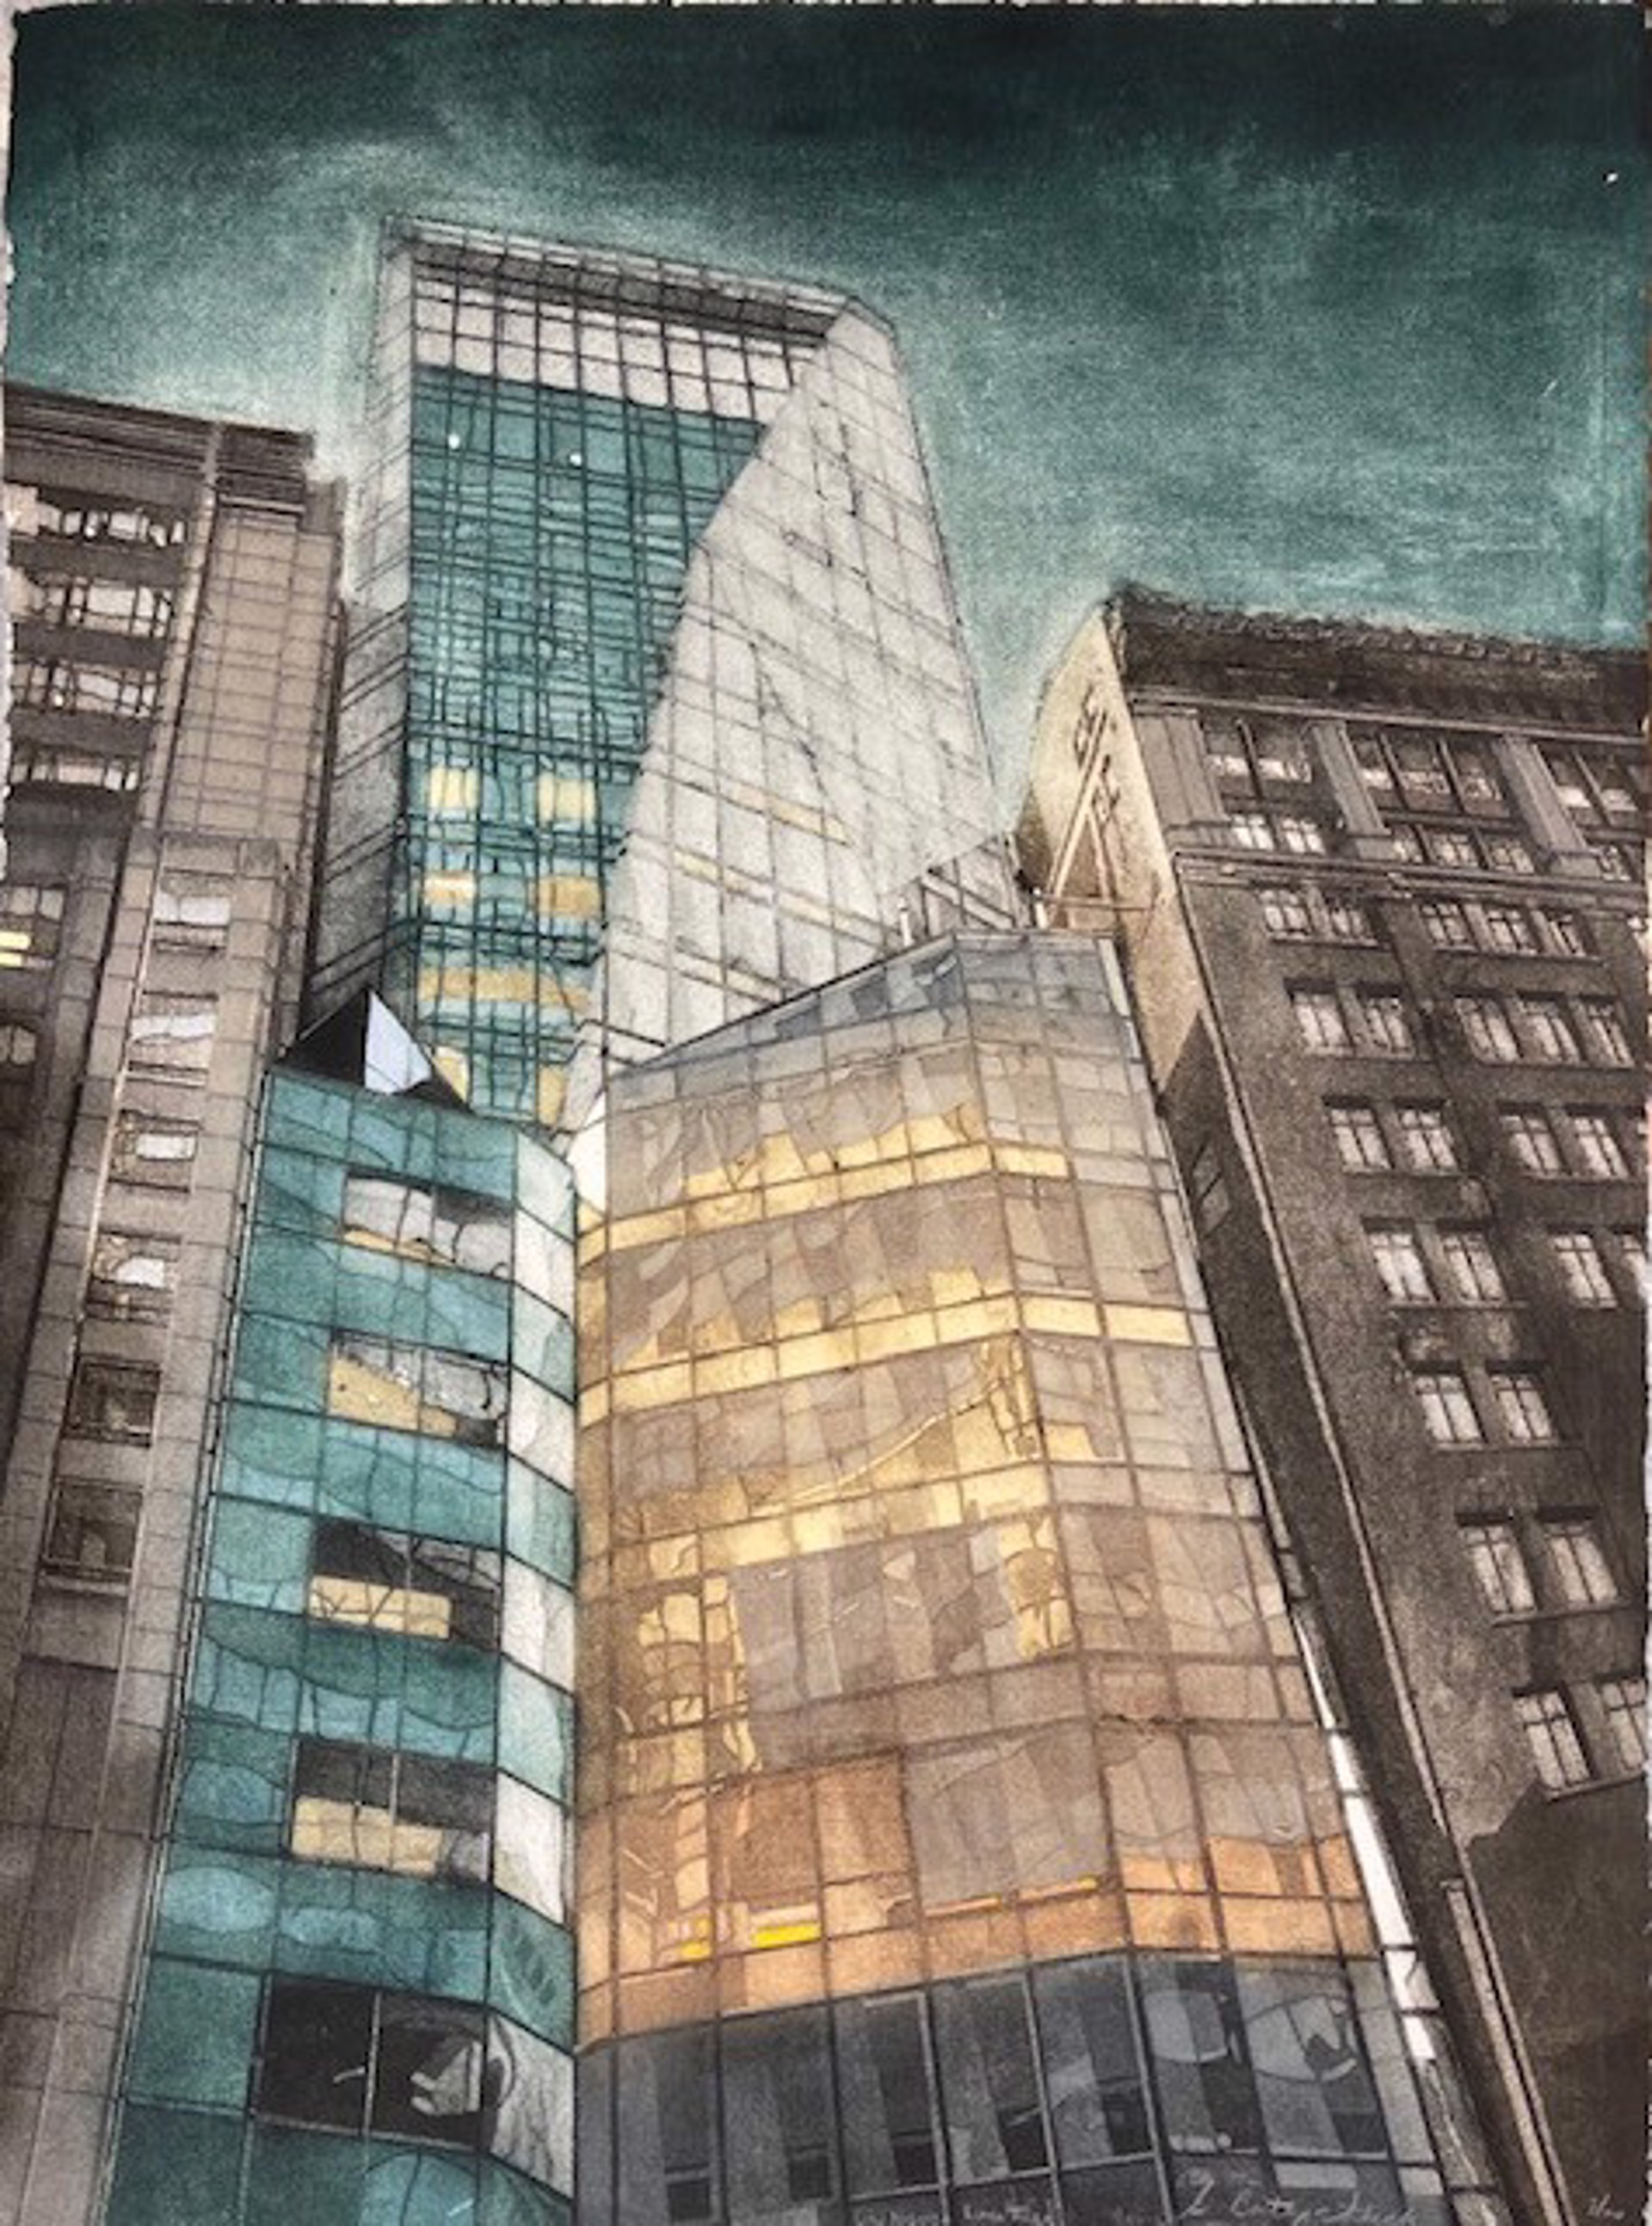 City Nights LVMH (Louis Vuitton Moet Hennessy) Tower 19/100 by Grace Bentley-Scheck